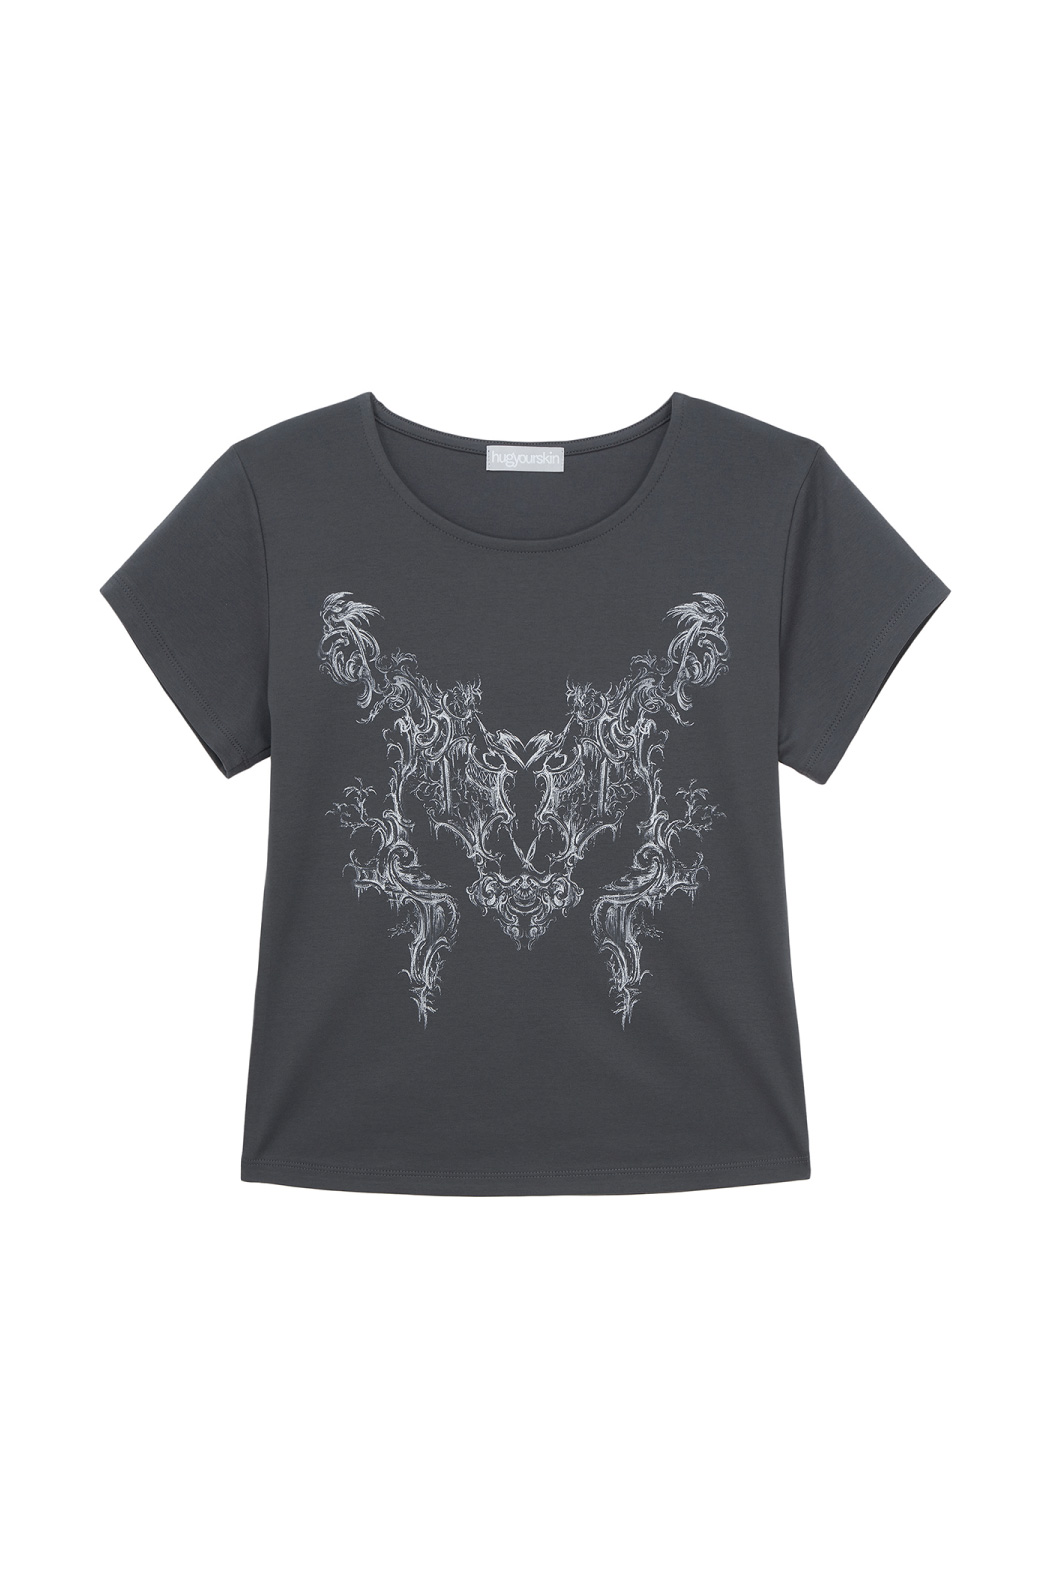 rococo T shirts HS ver (charcoal)